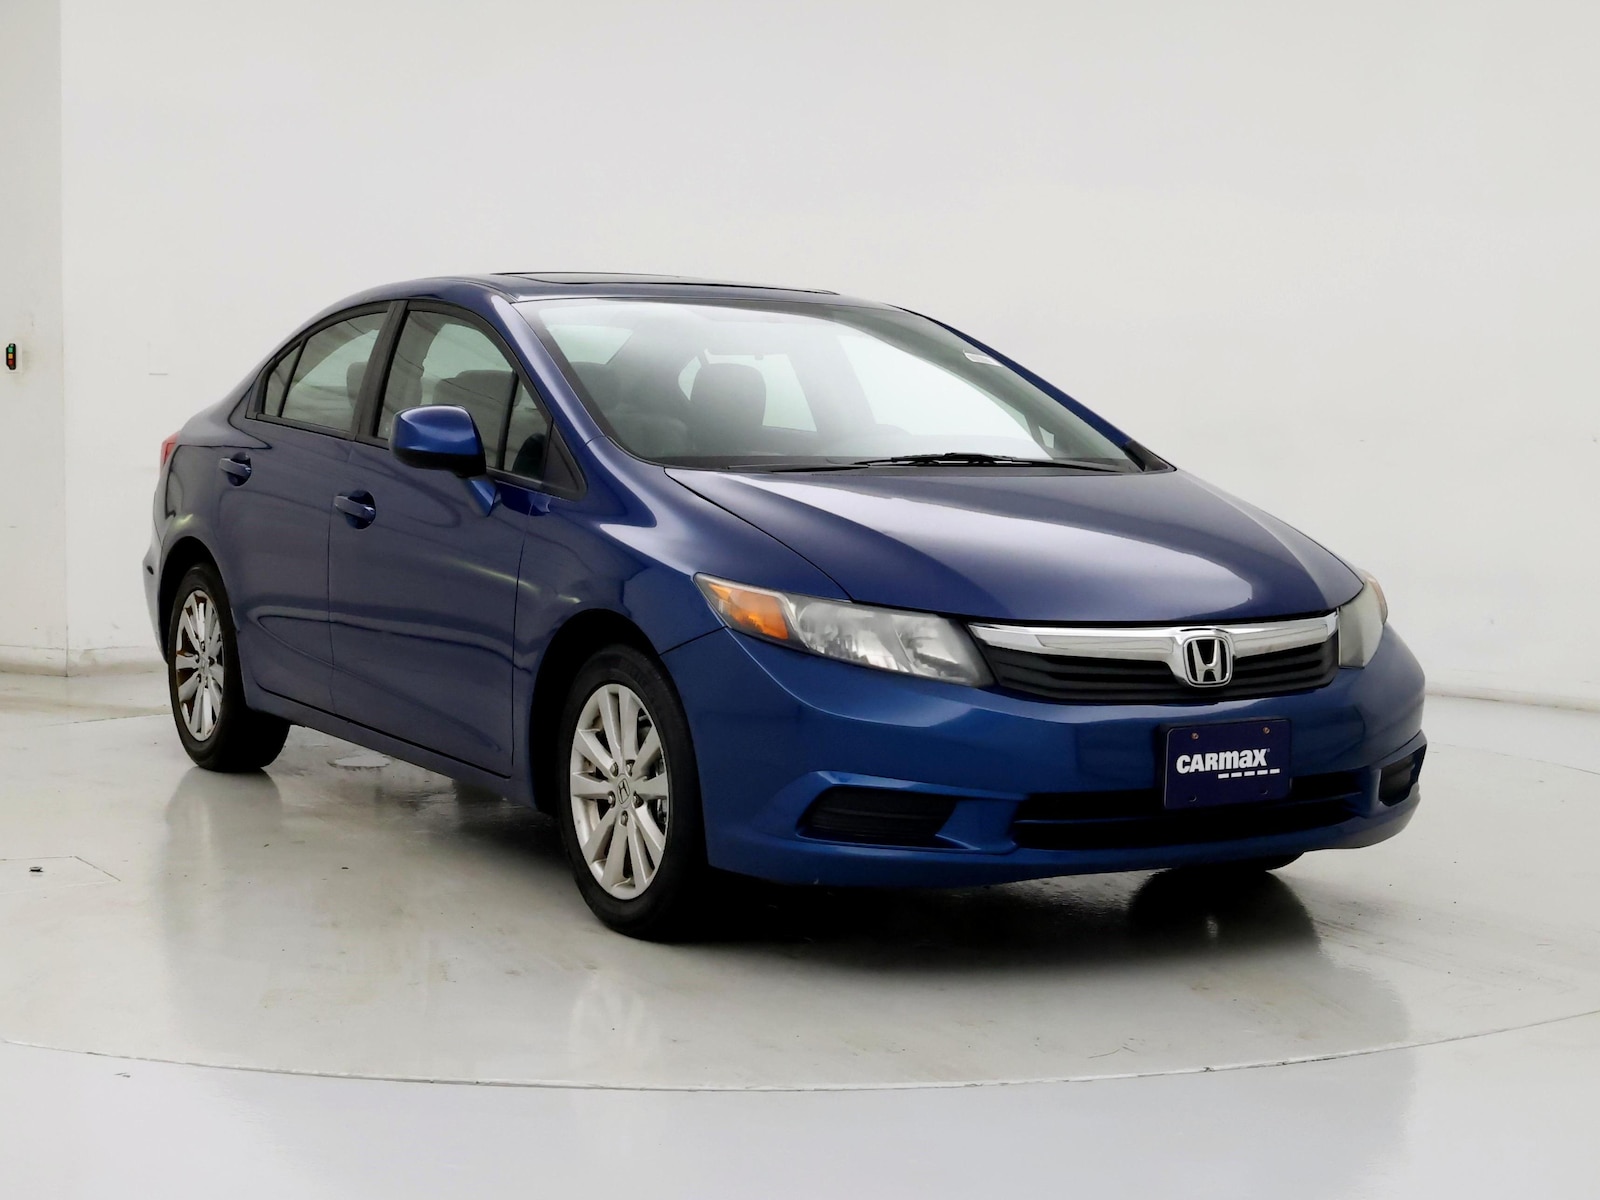 Used 2012 Honda Civic EX-L with VIN 2HGFB2F93CH549067 for sale in Spokane Valley, WA